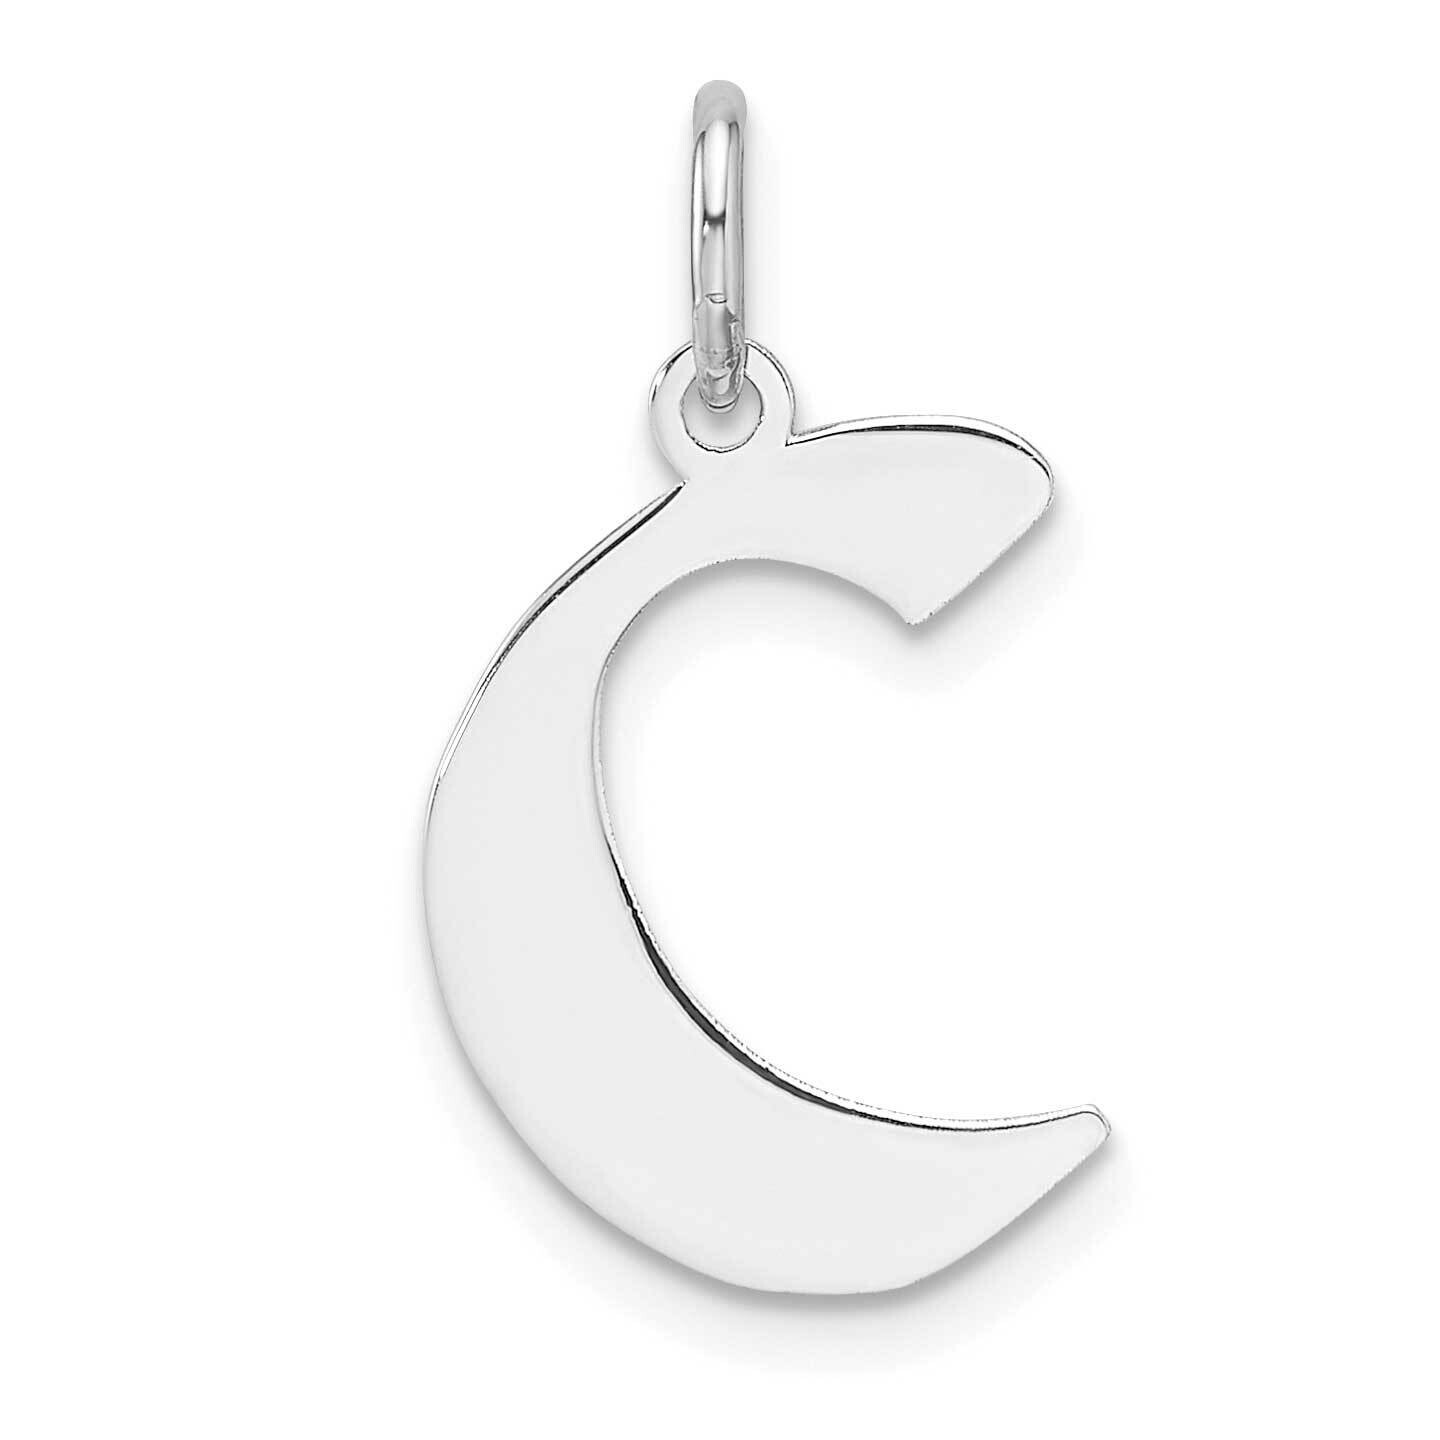 Small Artisan Block Letter C Initial Charm Sterling Silver Rhodium-Plated QC11256C